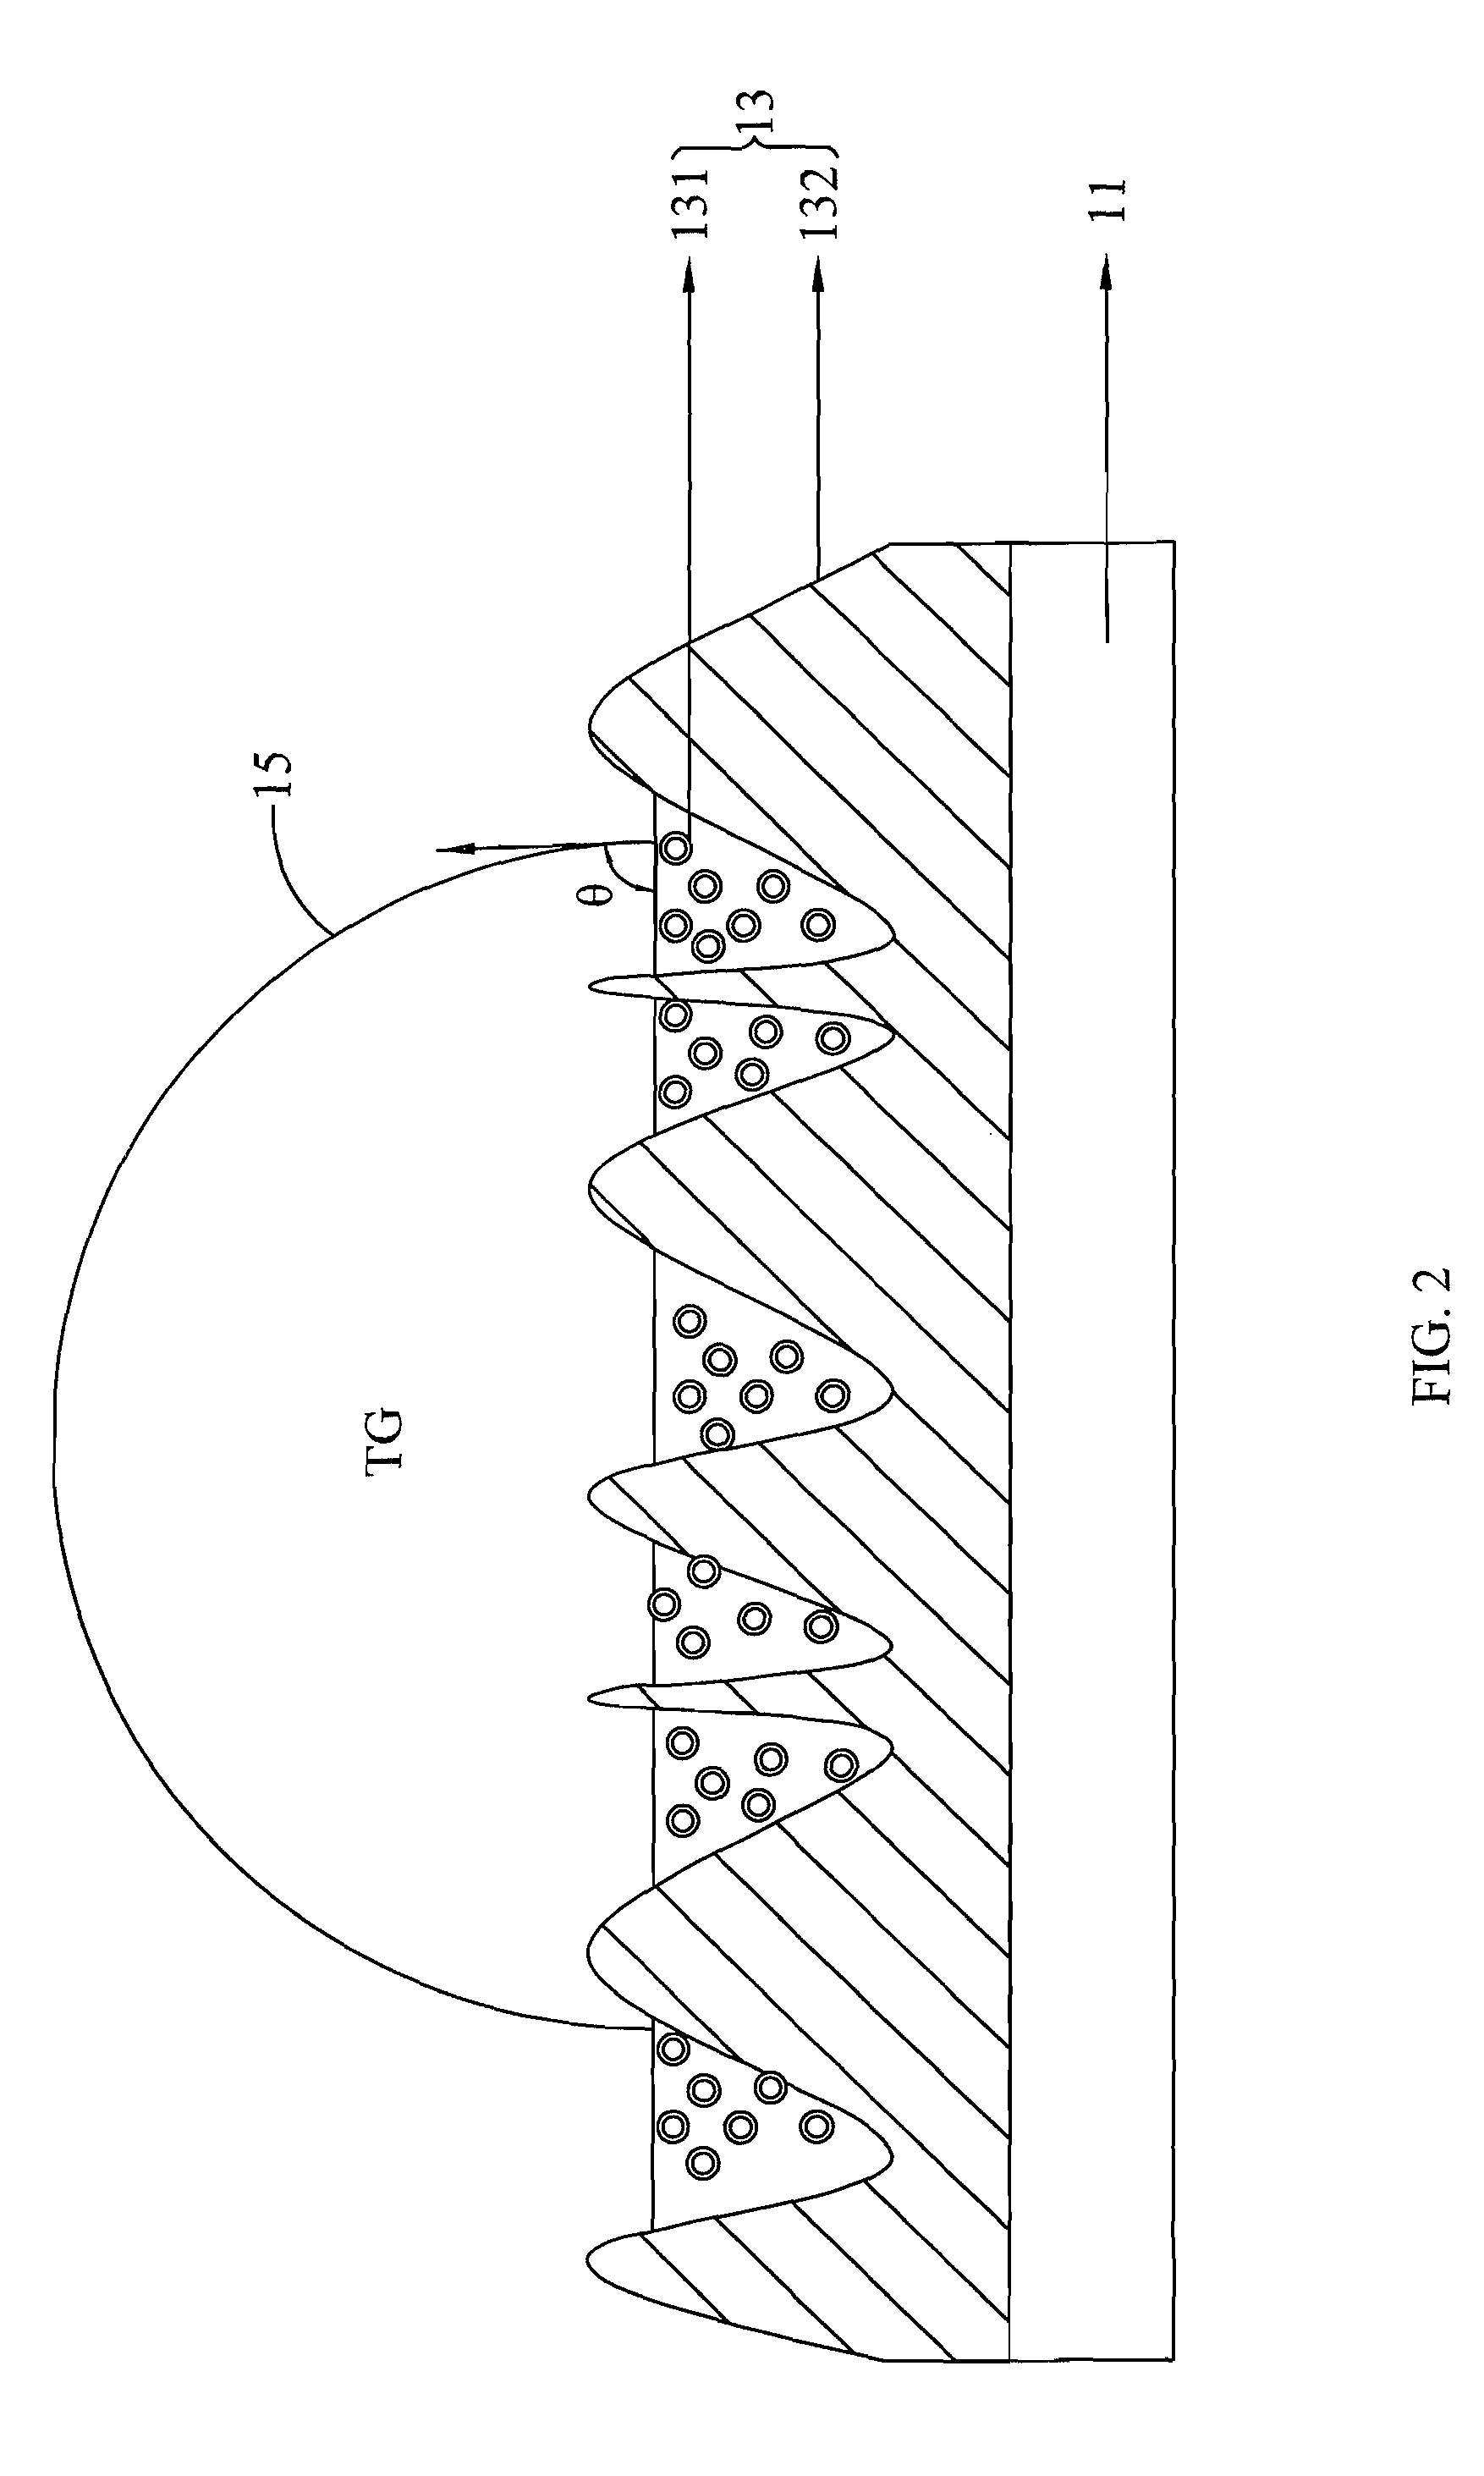 Biological detection device and method utilizing LCPCF film for testing liquid form samples containing triglyceride/HDL disposed thereon